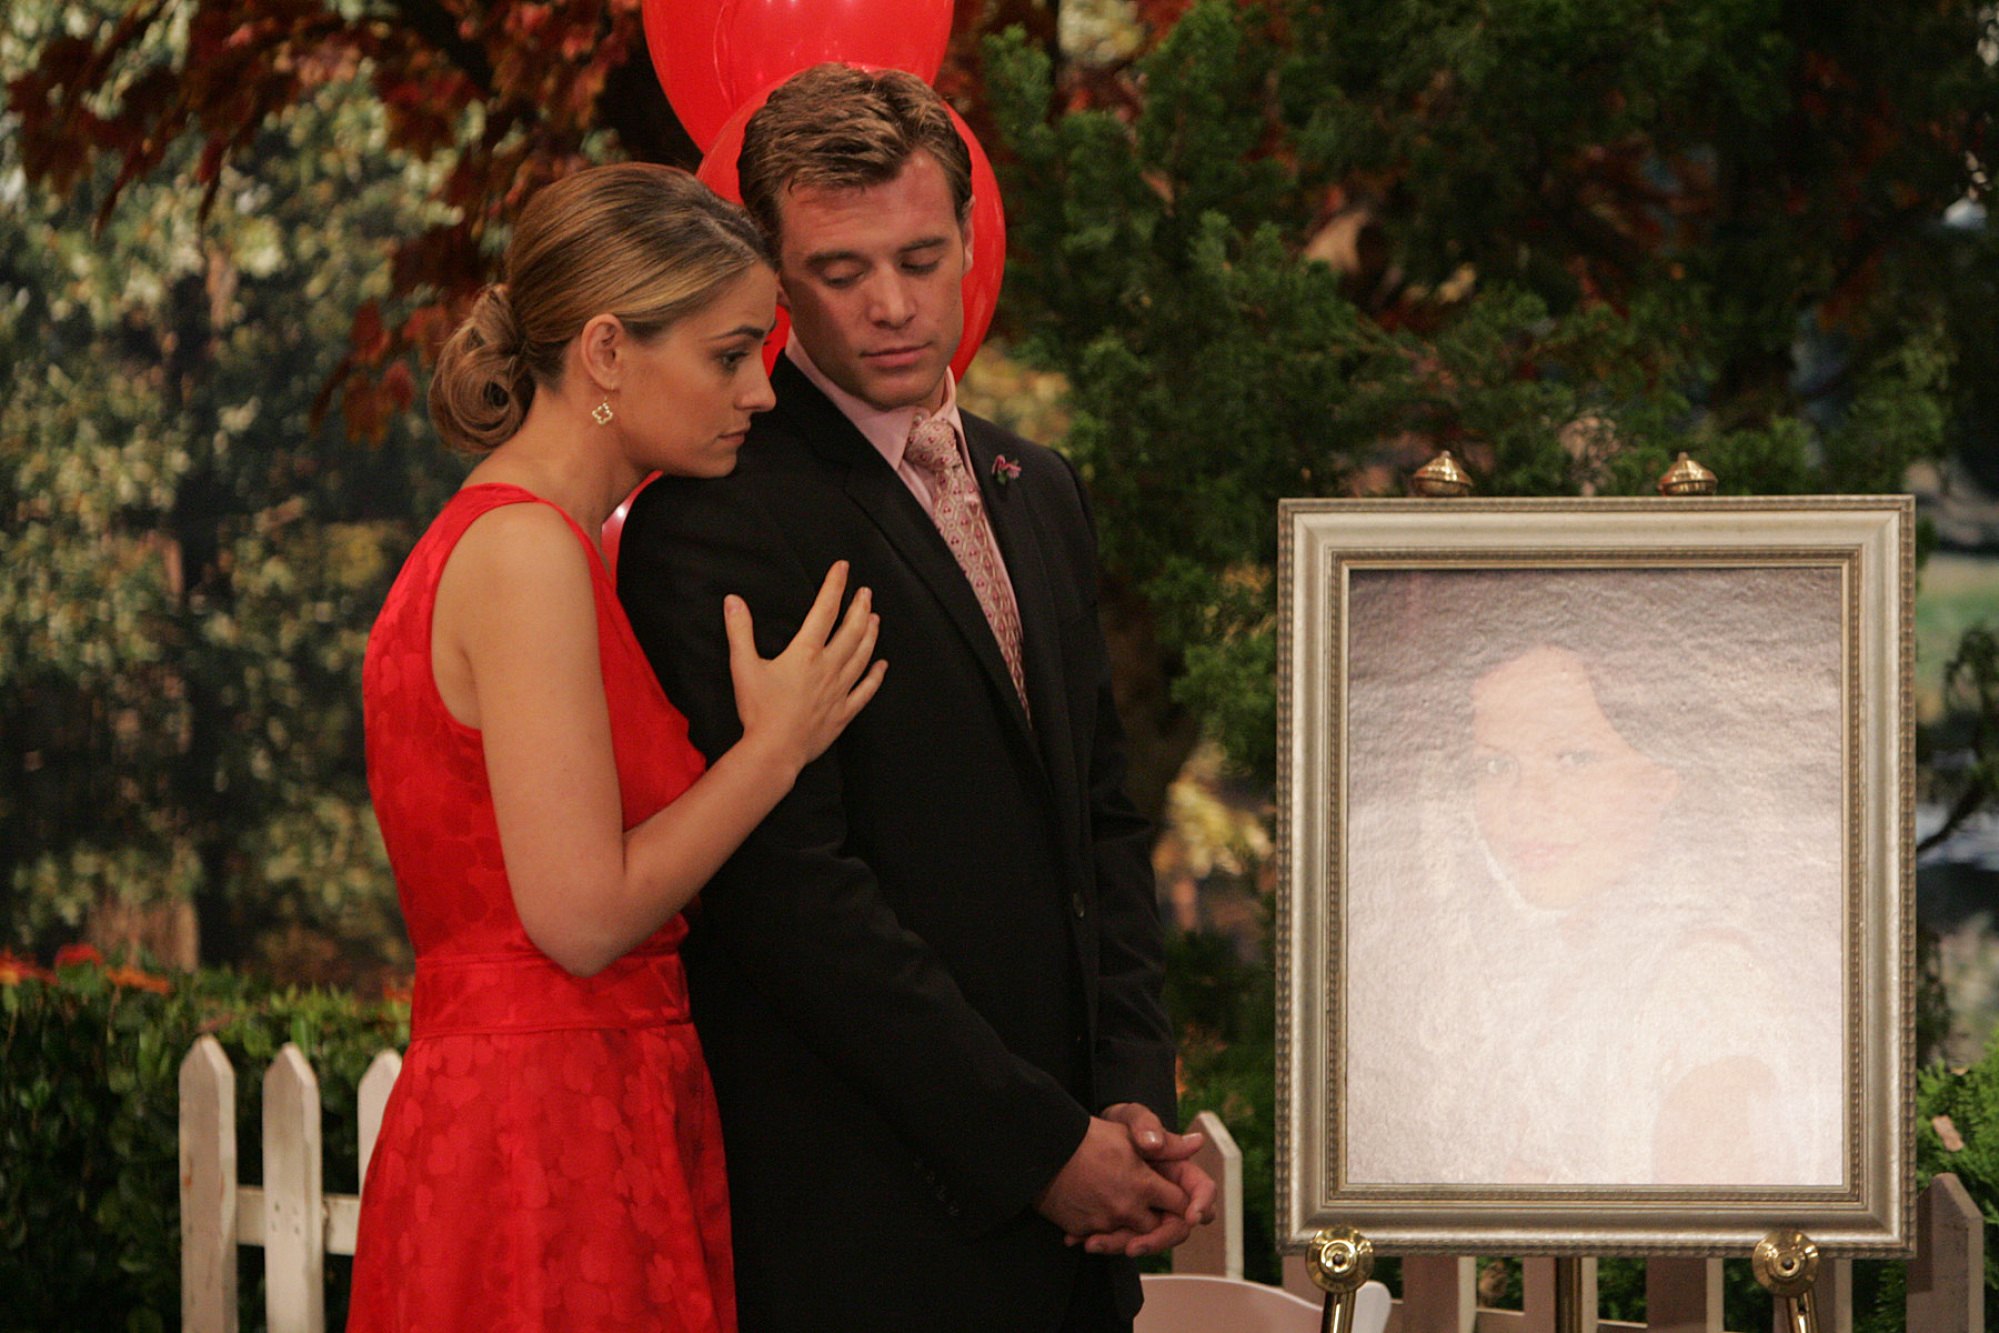 Clementine Ford y Billy Miller en un episodio de "The Young and the Restless" en 2009 | Foto: Getty Images